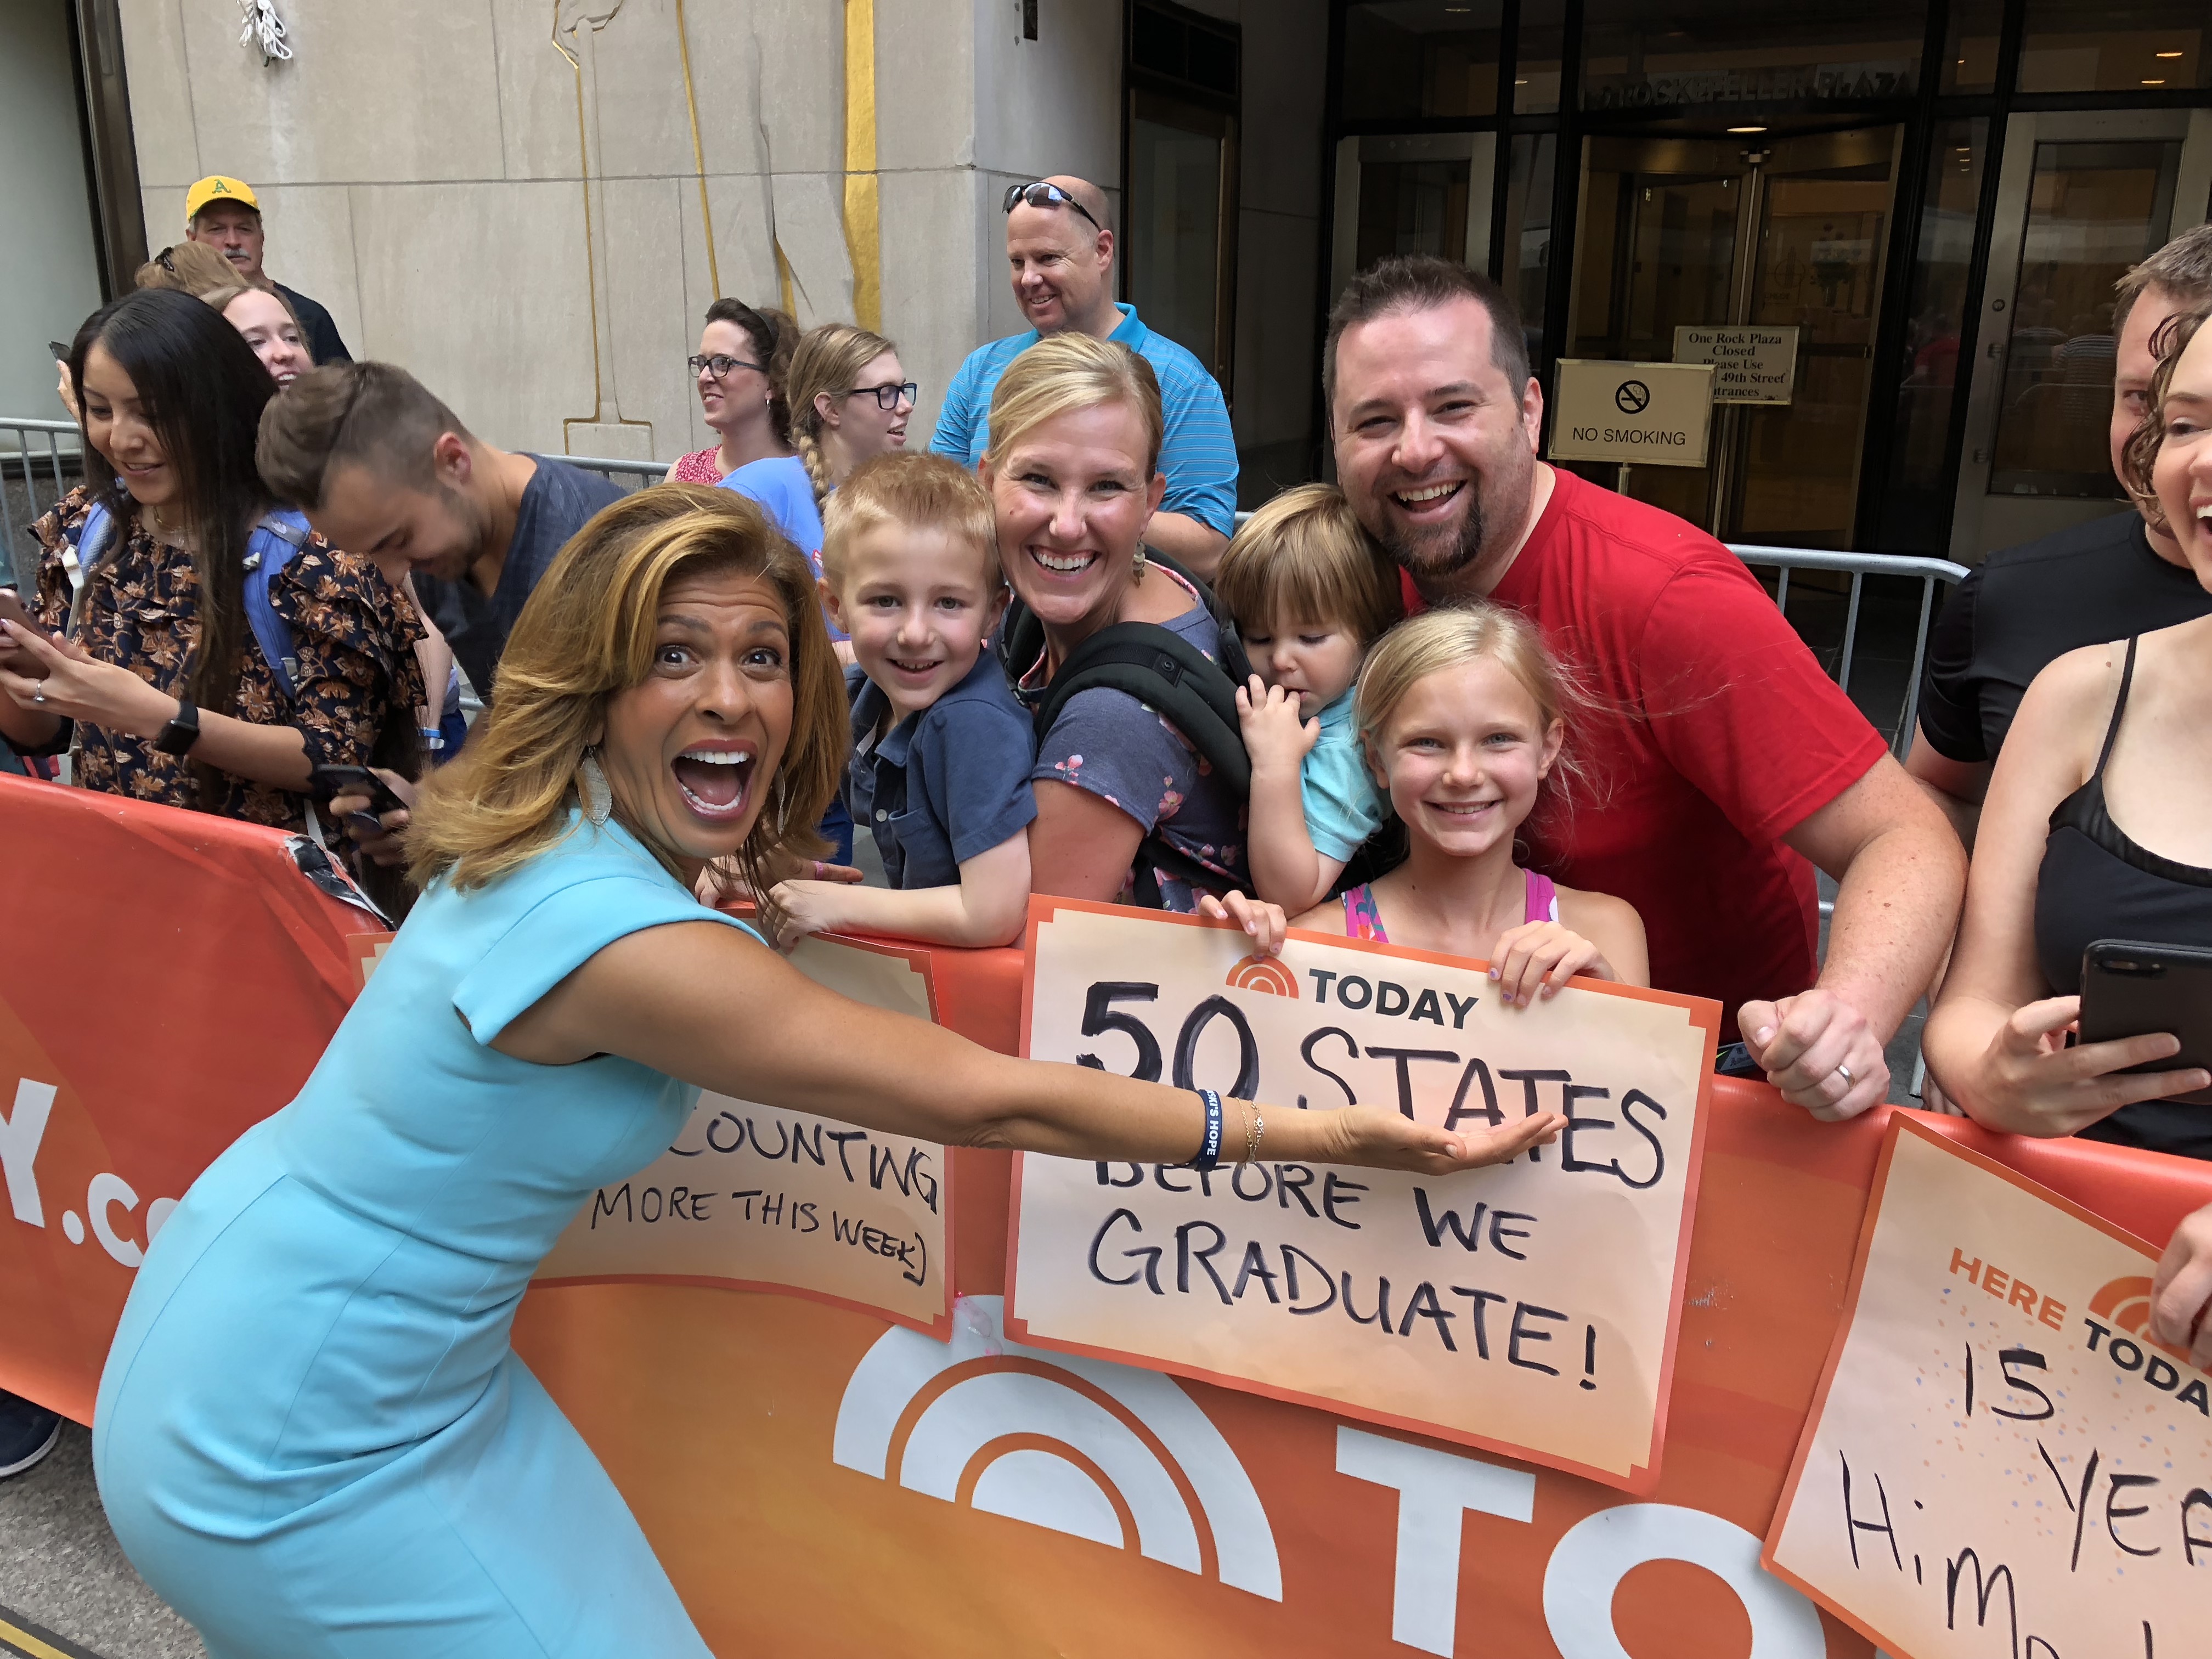 Michael and his family with Hoda at the Today Show in New York. July 5, 2018.